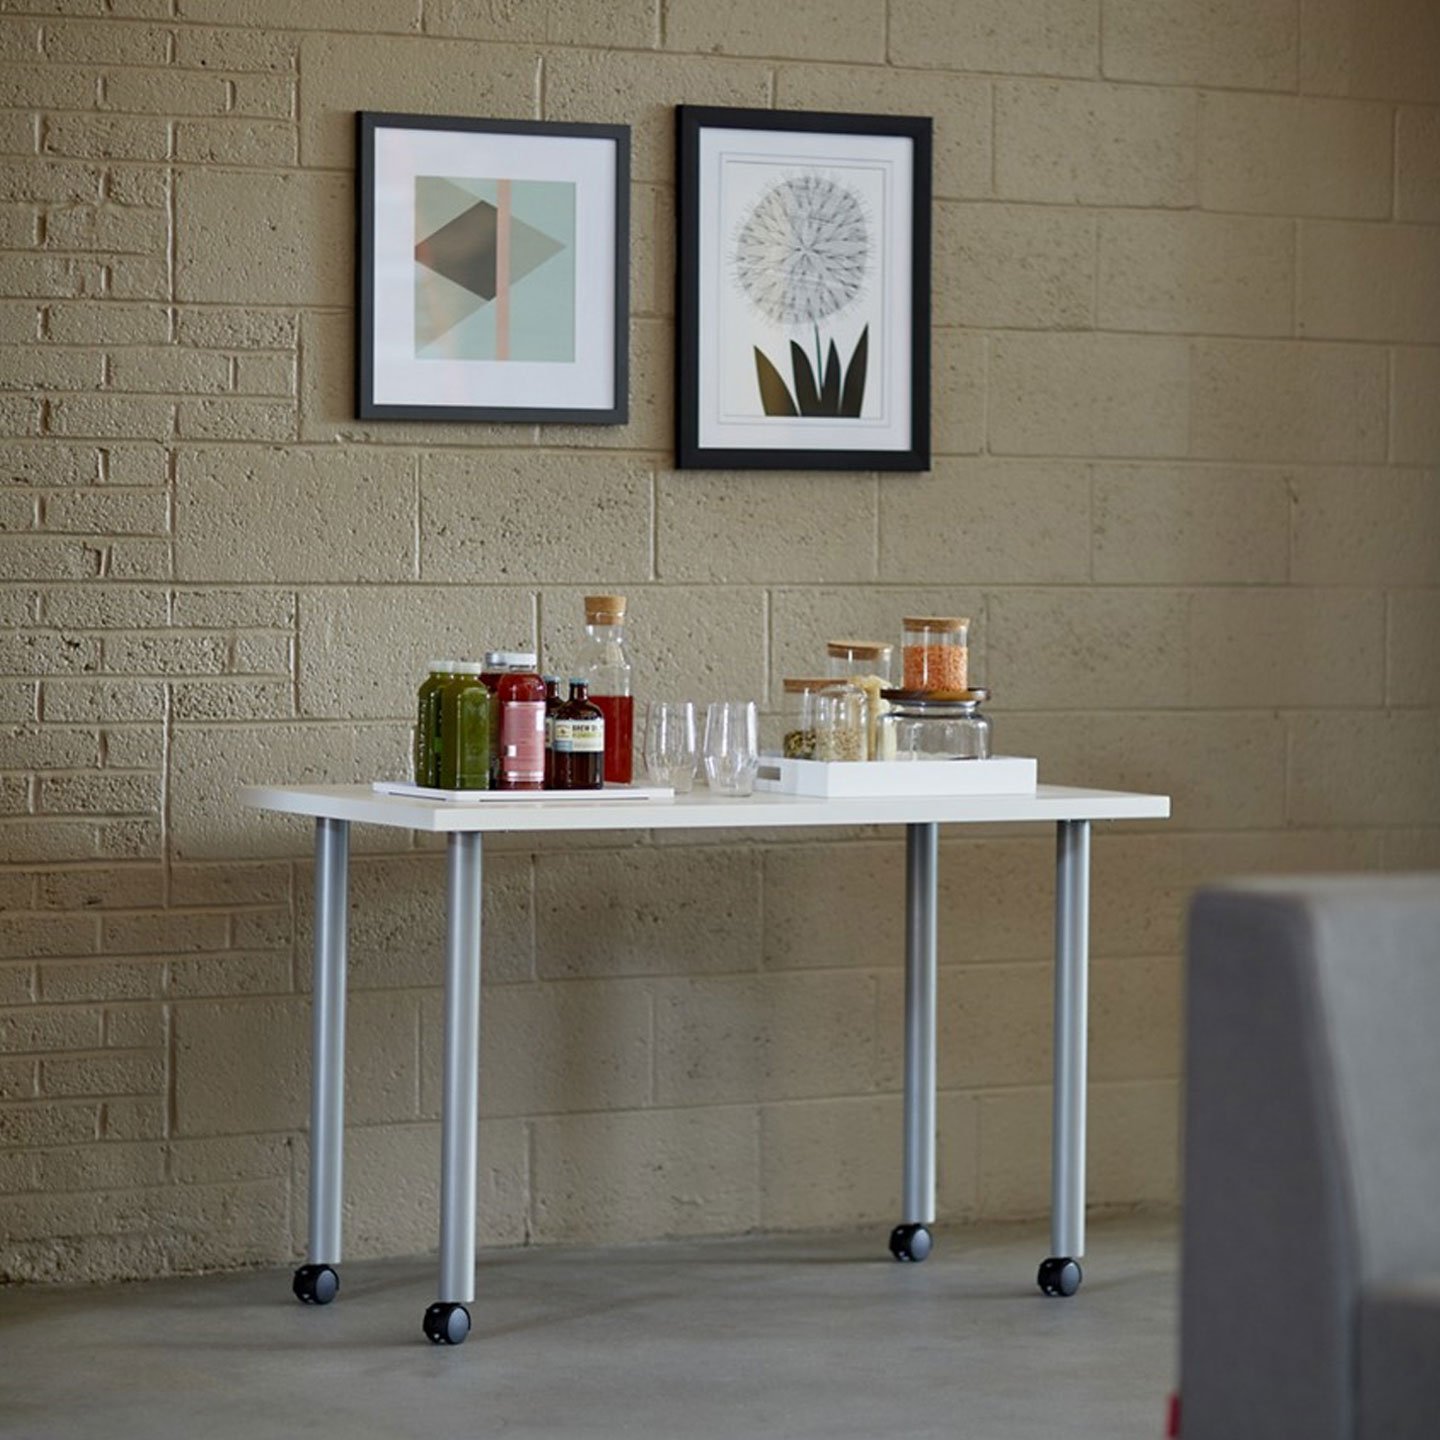 Haworth Jive Table in a casual office area used as a beverage and food cart 